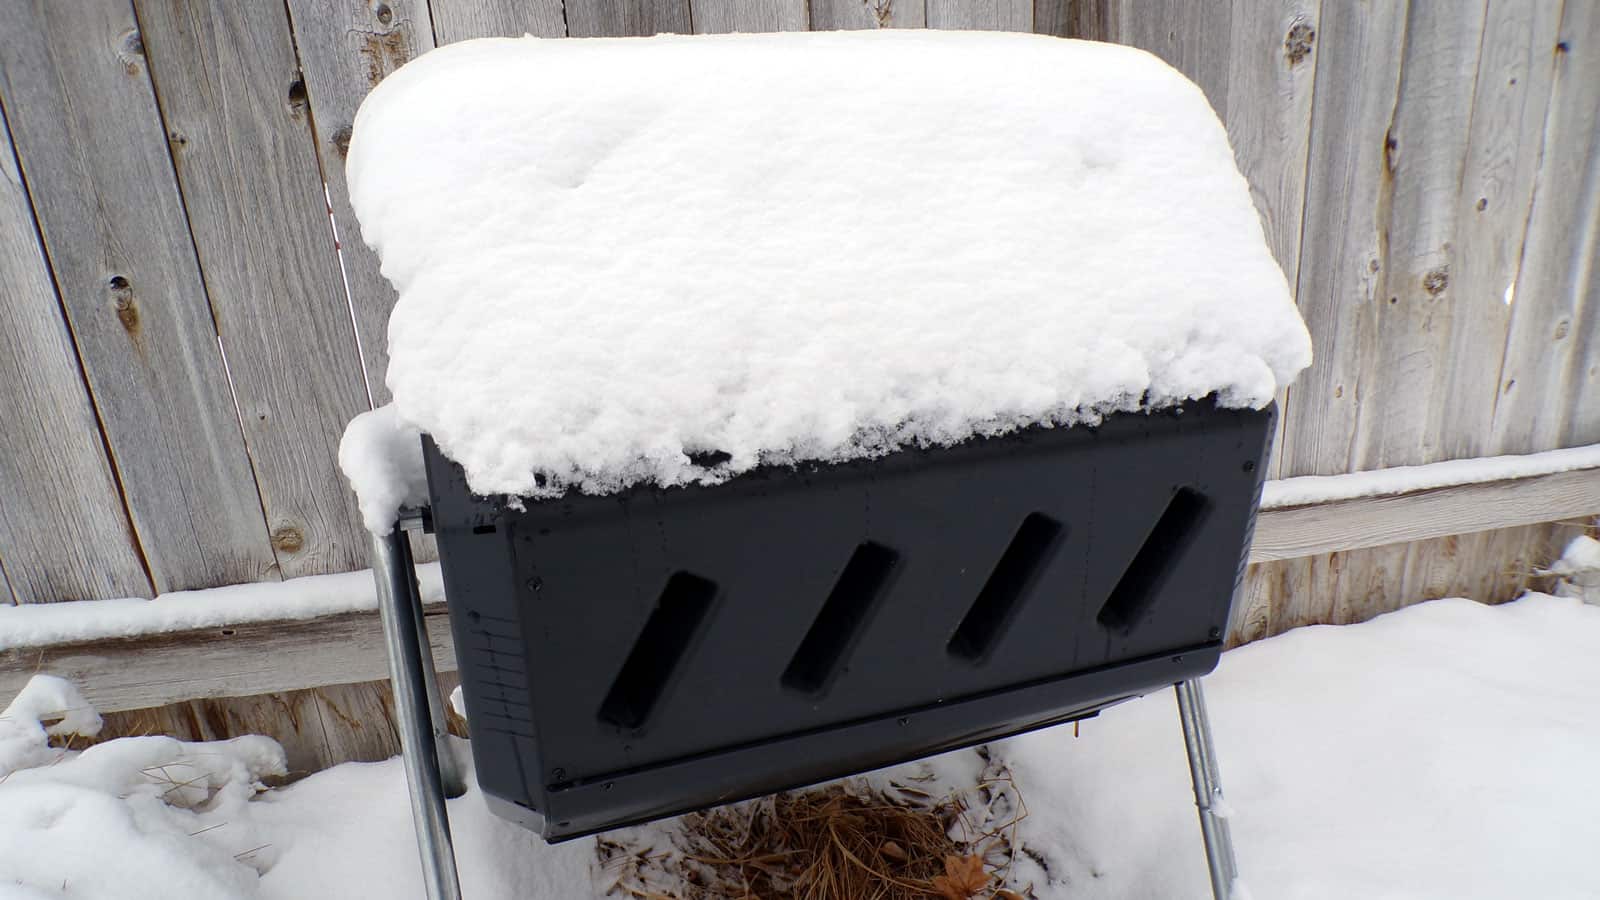 A metal composting bin covered in snow